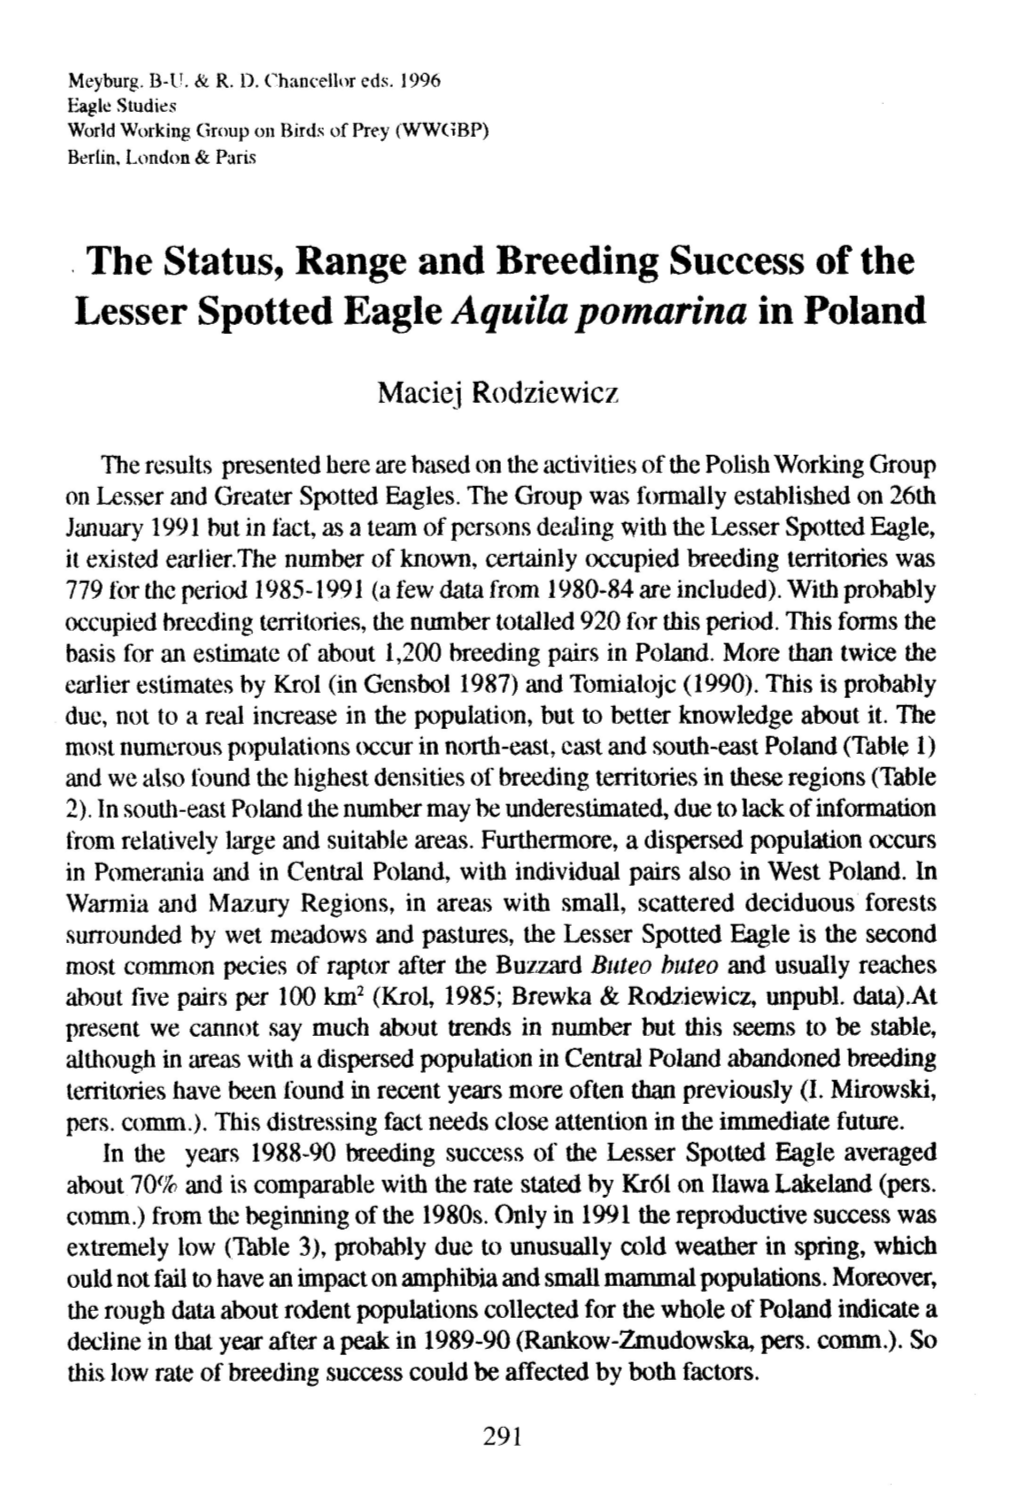 The Status, Range and Breeding Success of the Lesser Spotted Eagle Aquila Pomarina in Poland